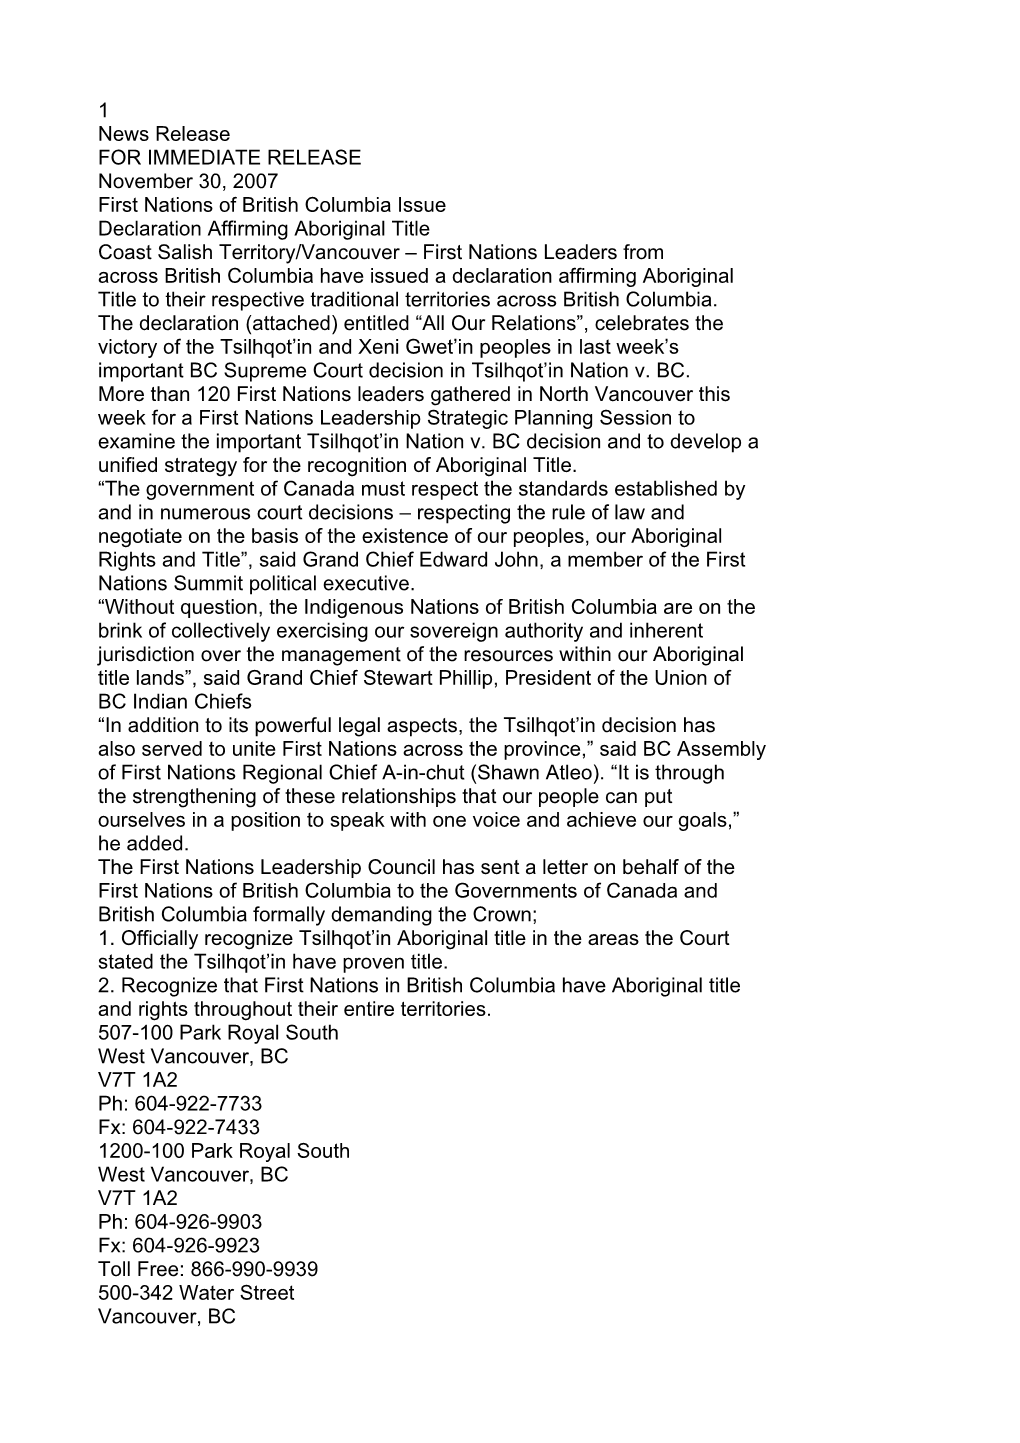 1 News Release for IMMEDIATE RELEASE November 30, 2007 First Nations of British Columbia